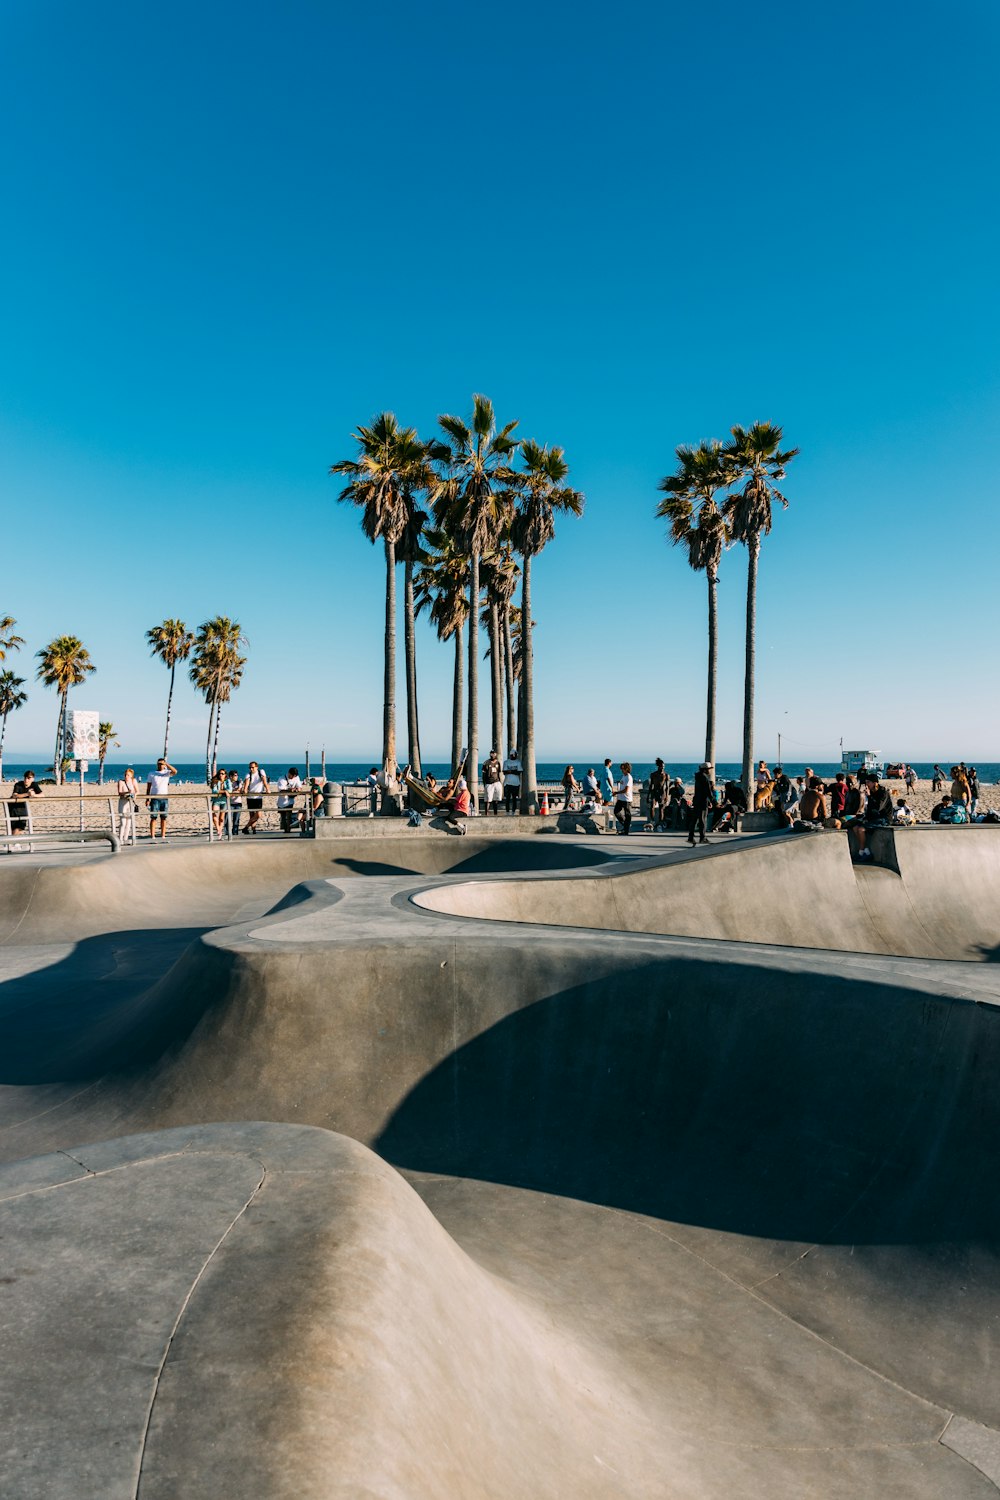 a skateboard park with palm trees and people